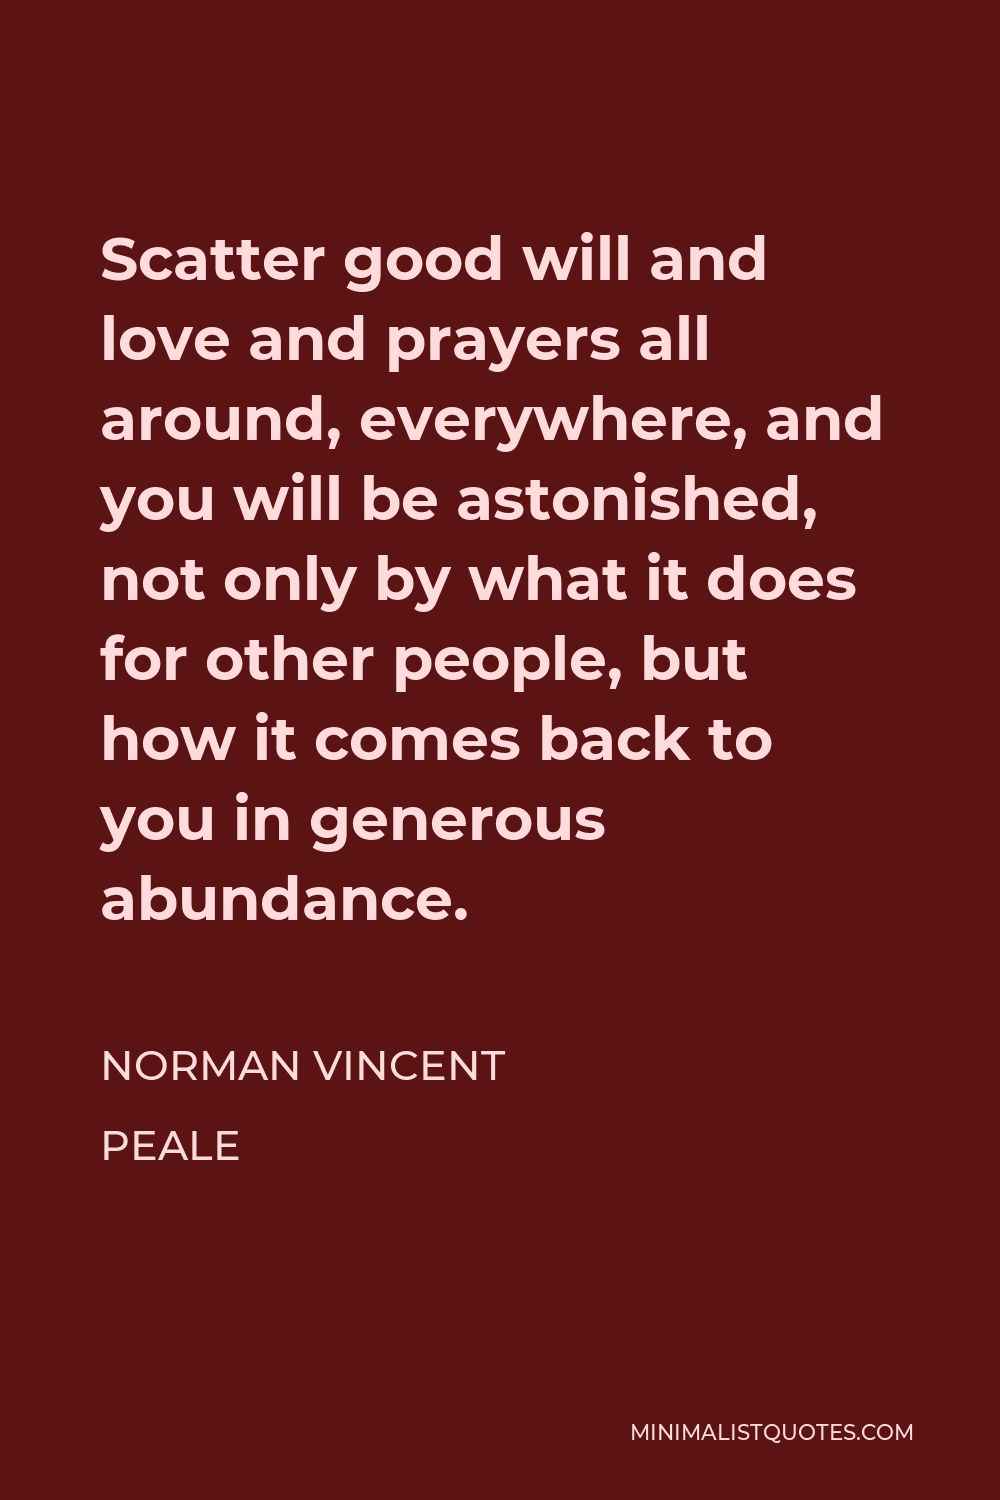 Norman Vincent Peale Quote - Scatter good will and love and prayers all around, everywhere, and you will be astonished, not only by what it does for other people, but how it comes back to you in generous abundance.